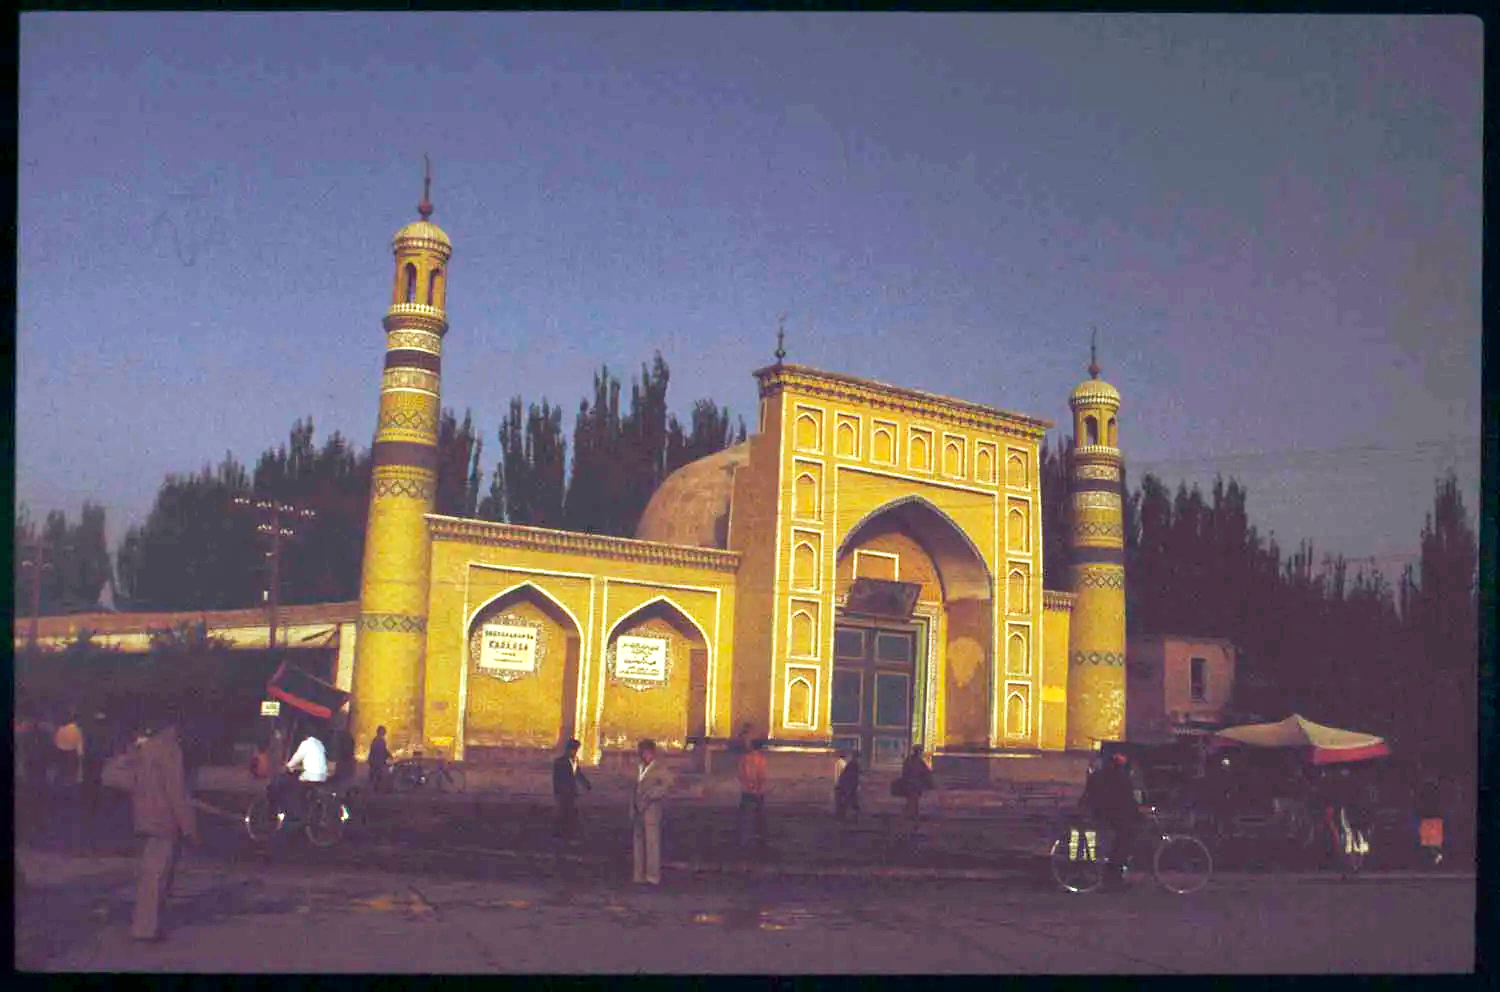 <p>Unidentified building (possibly mosque) in Xinjiang, China.</p>